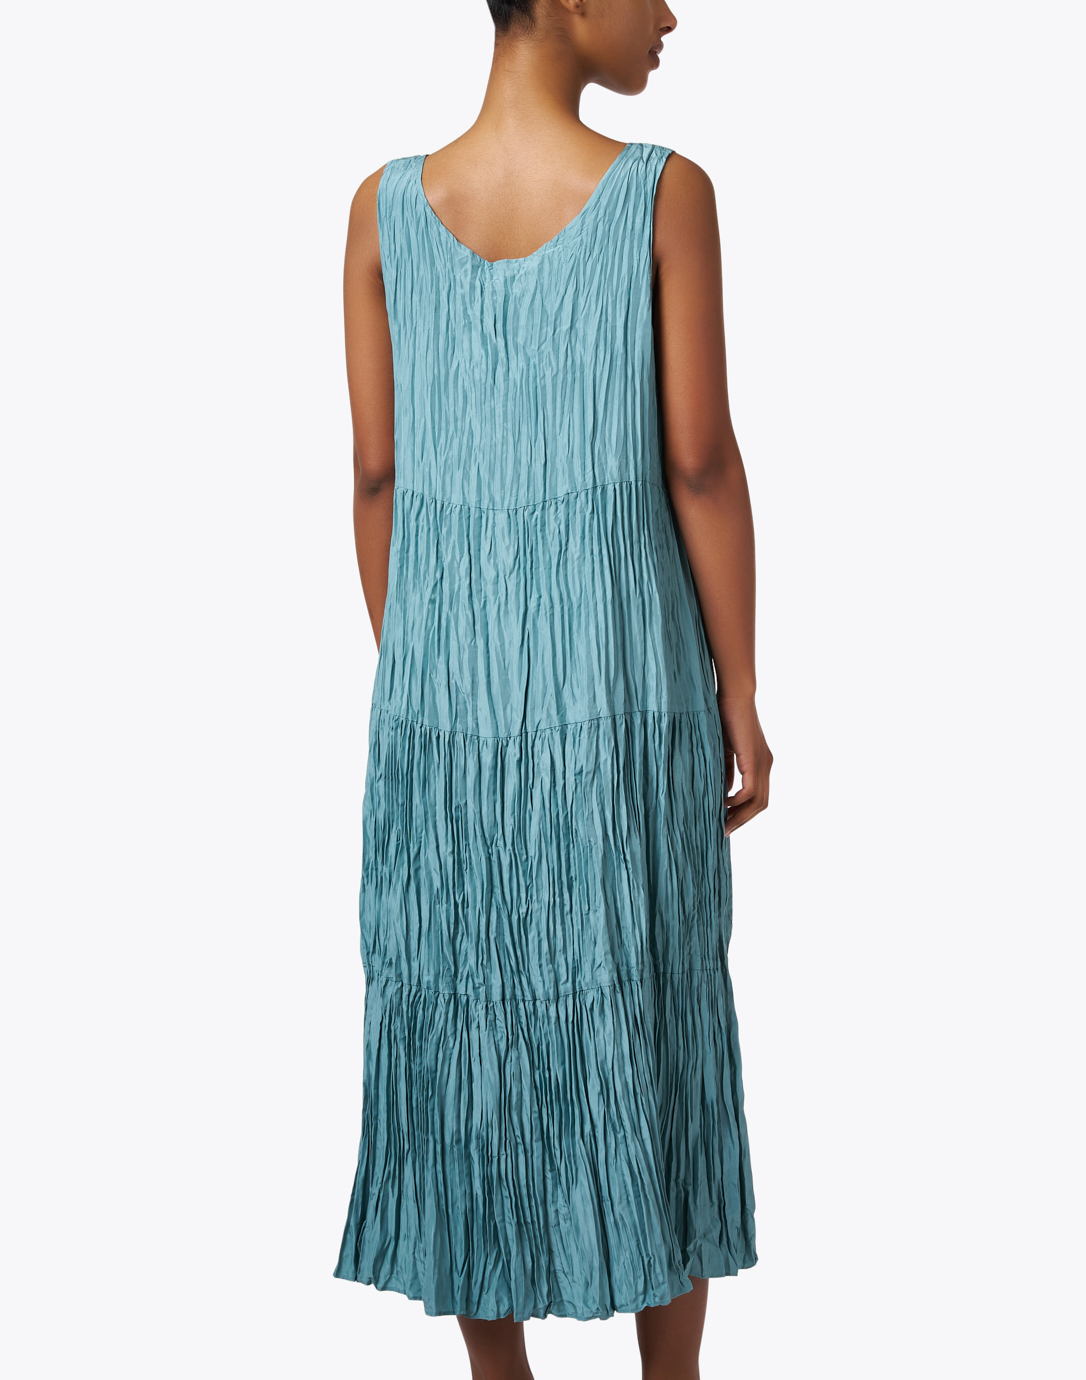 Turquoise Crushed Silk Dress | Eileen Fisher